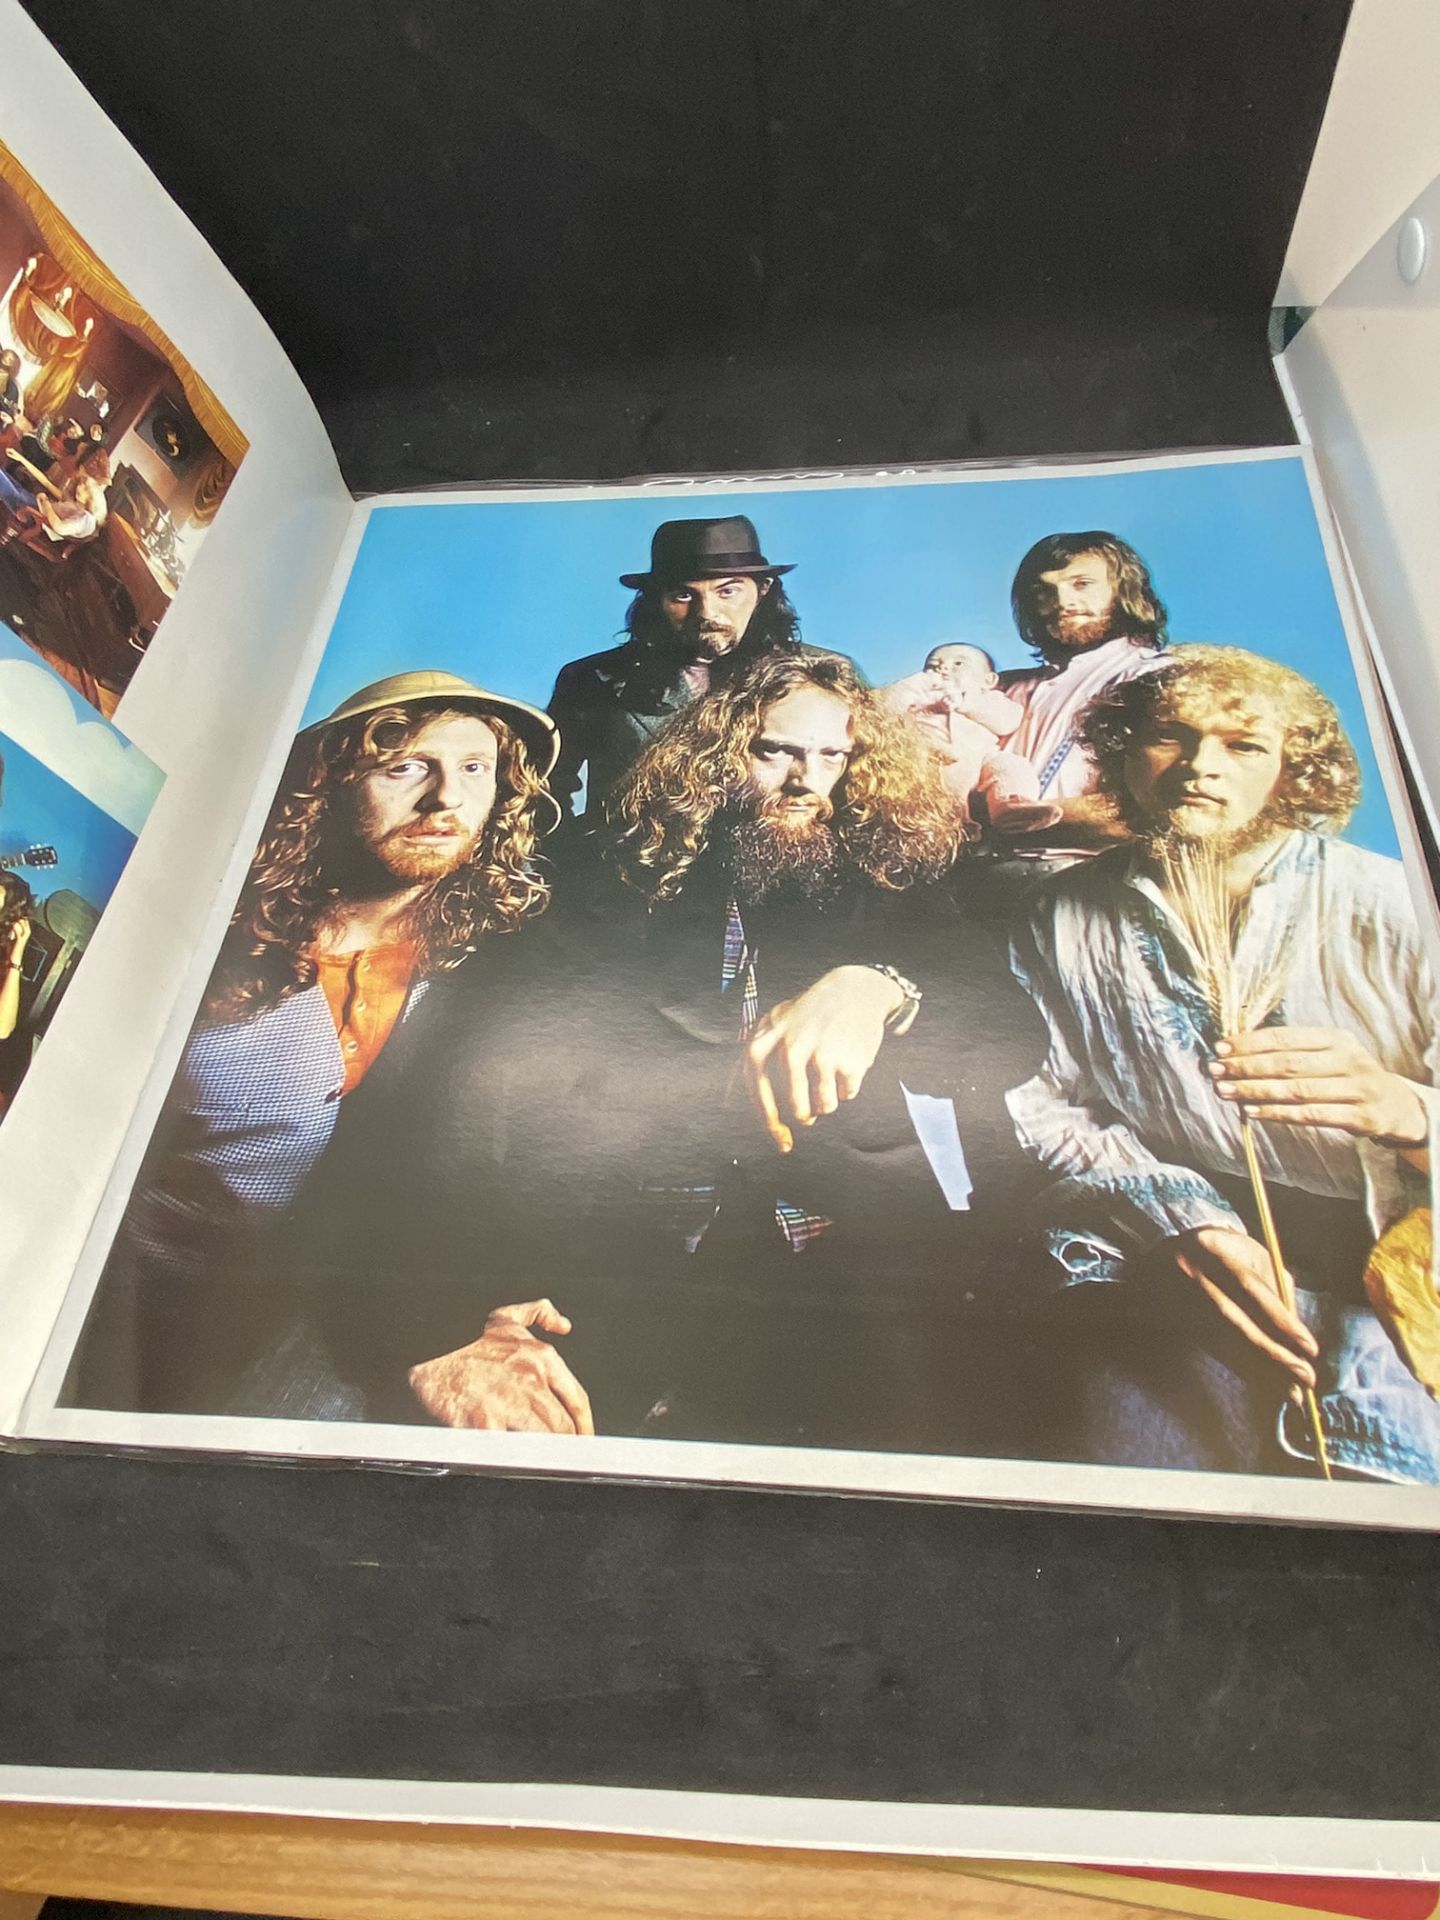 JETHRO TULL - LIVING IN THE PAST ALBUM - FROM PRIVATE COLLECTION - Image 9 of 36